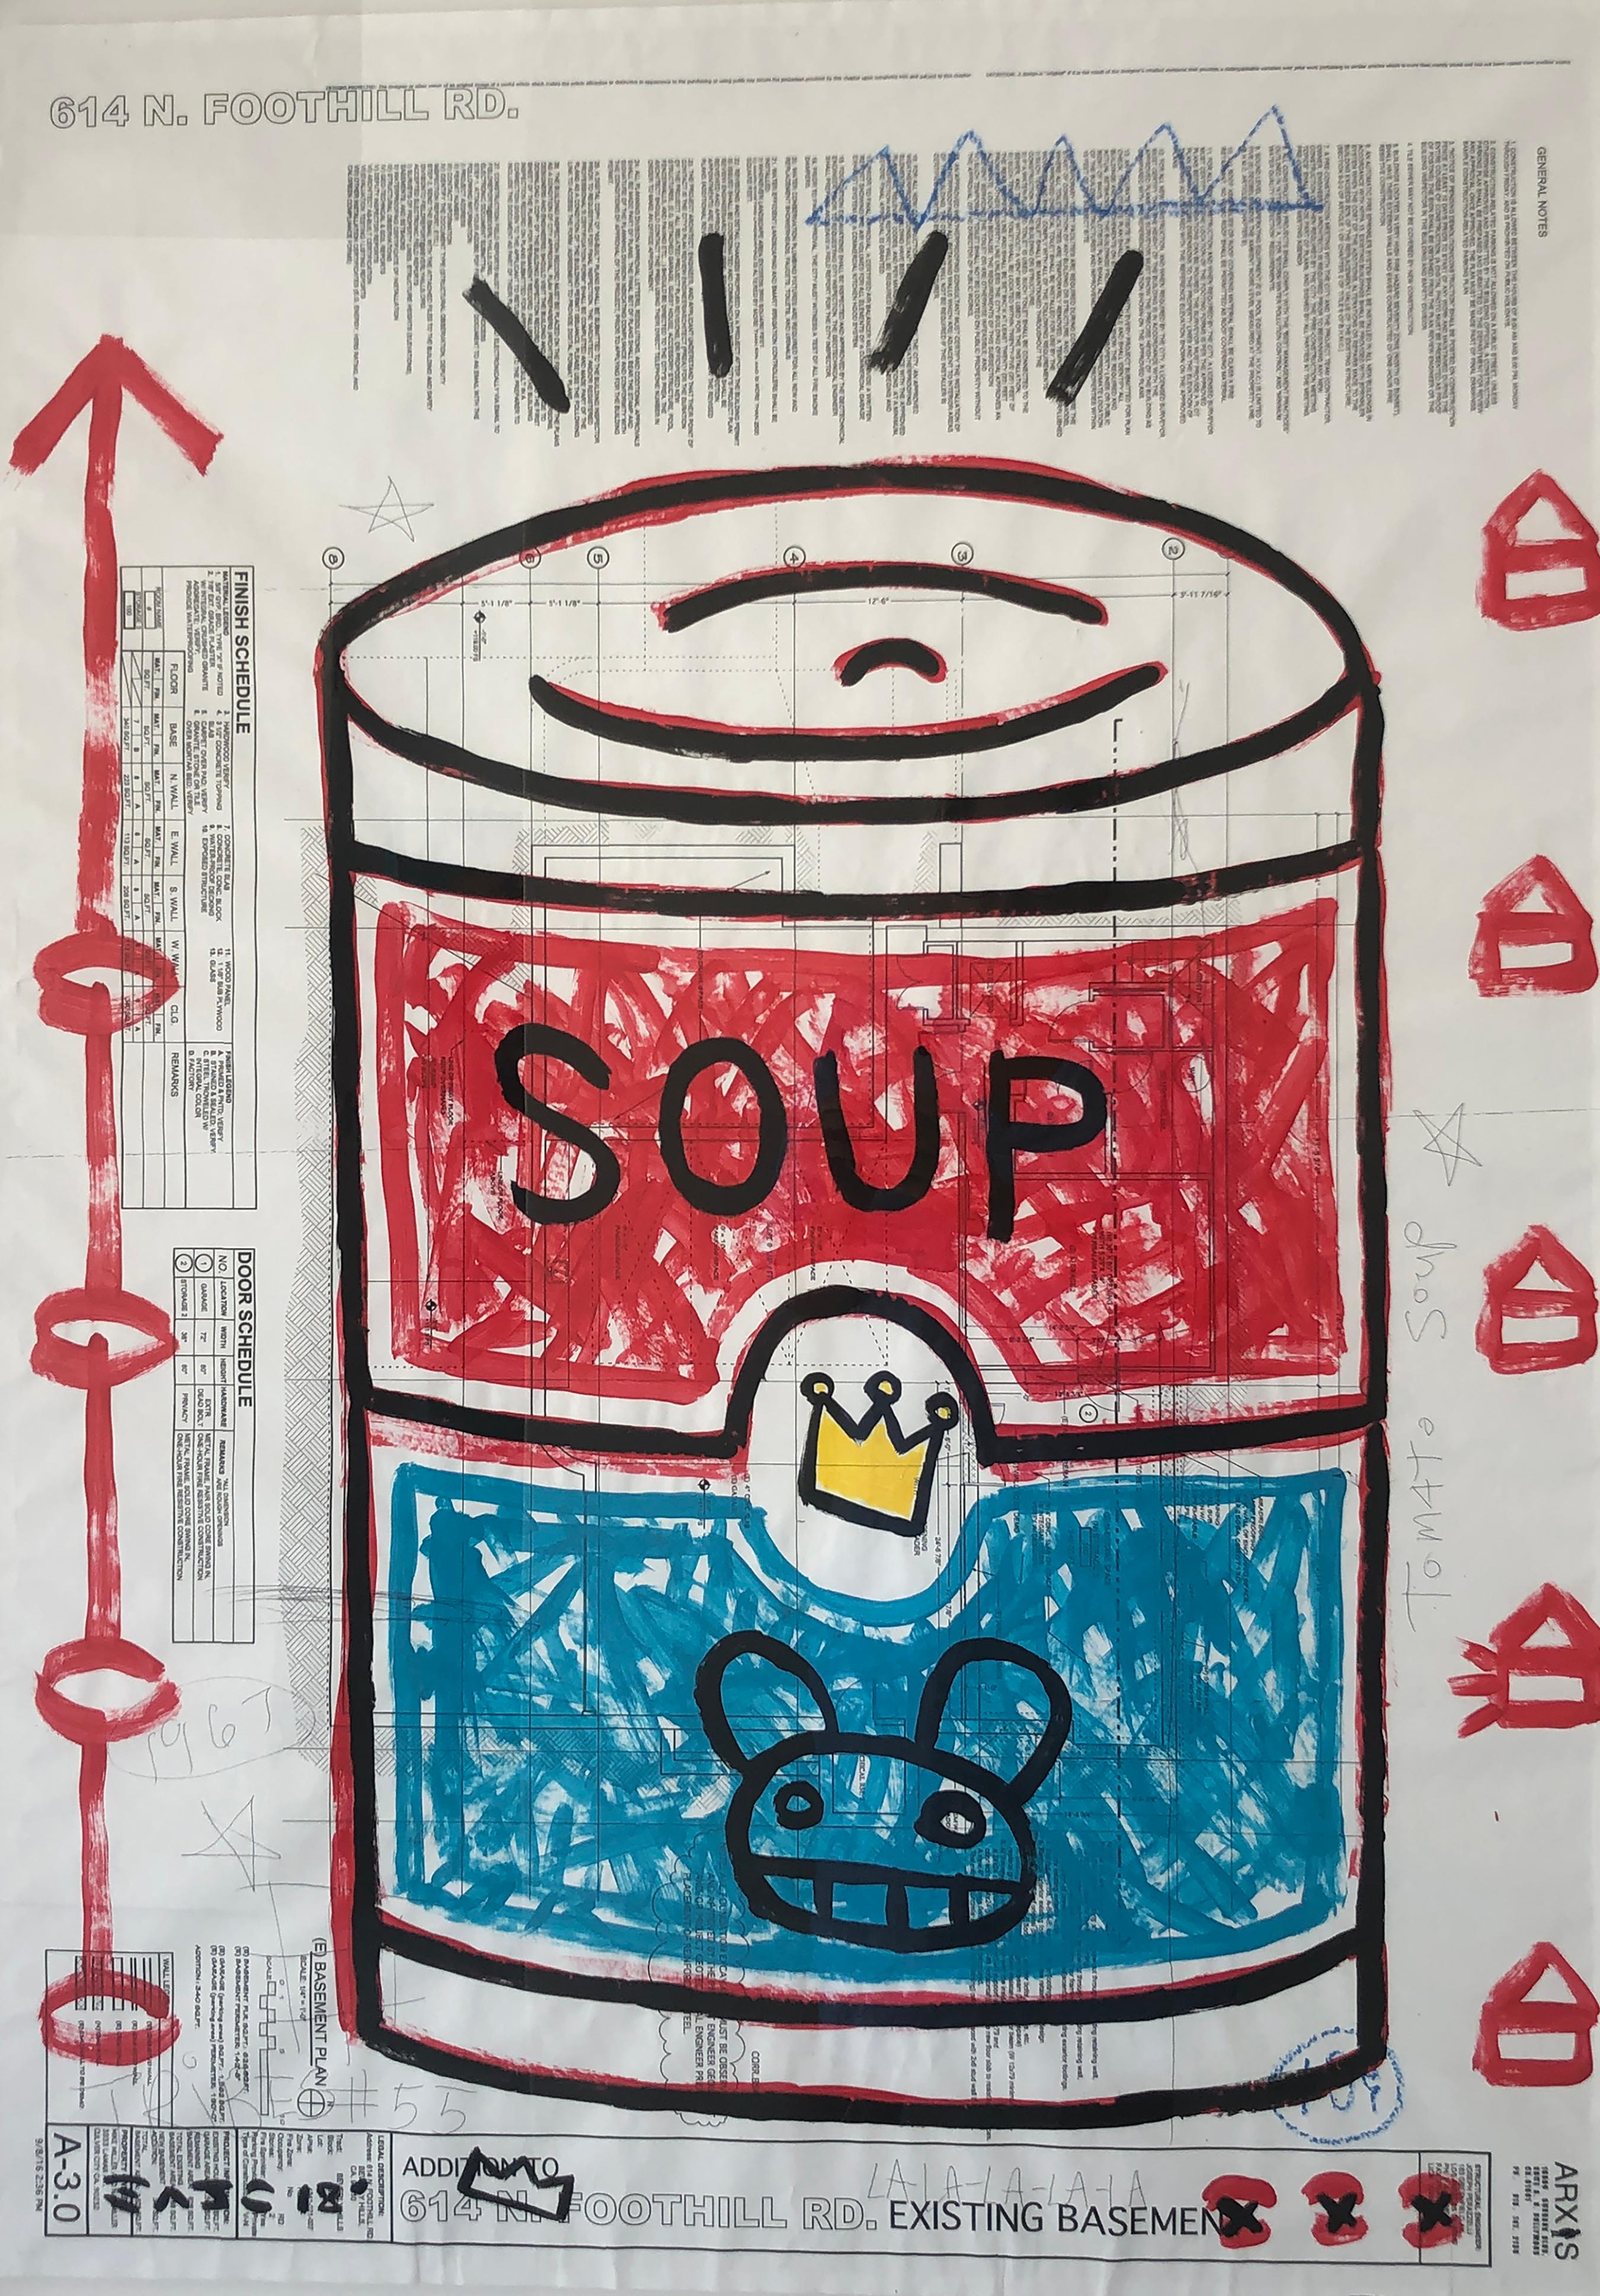 Gary John Figurative Print - "Soup Can Architectural" - acrylic on architect paper, framed